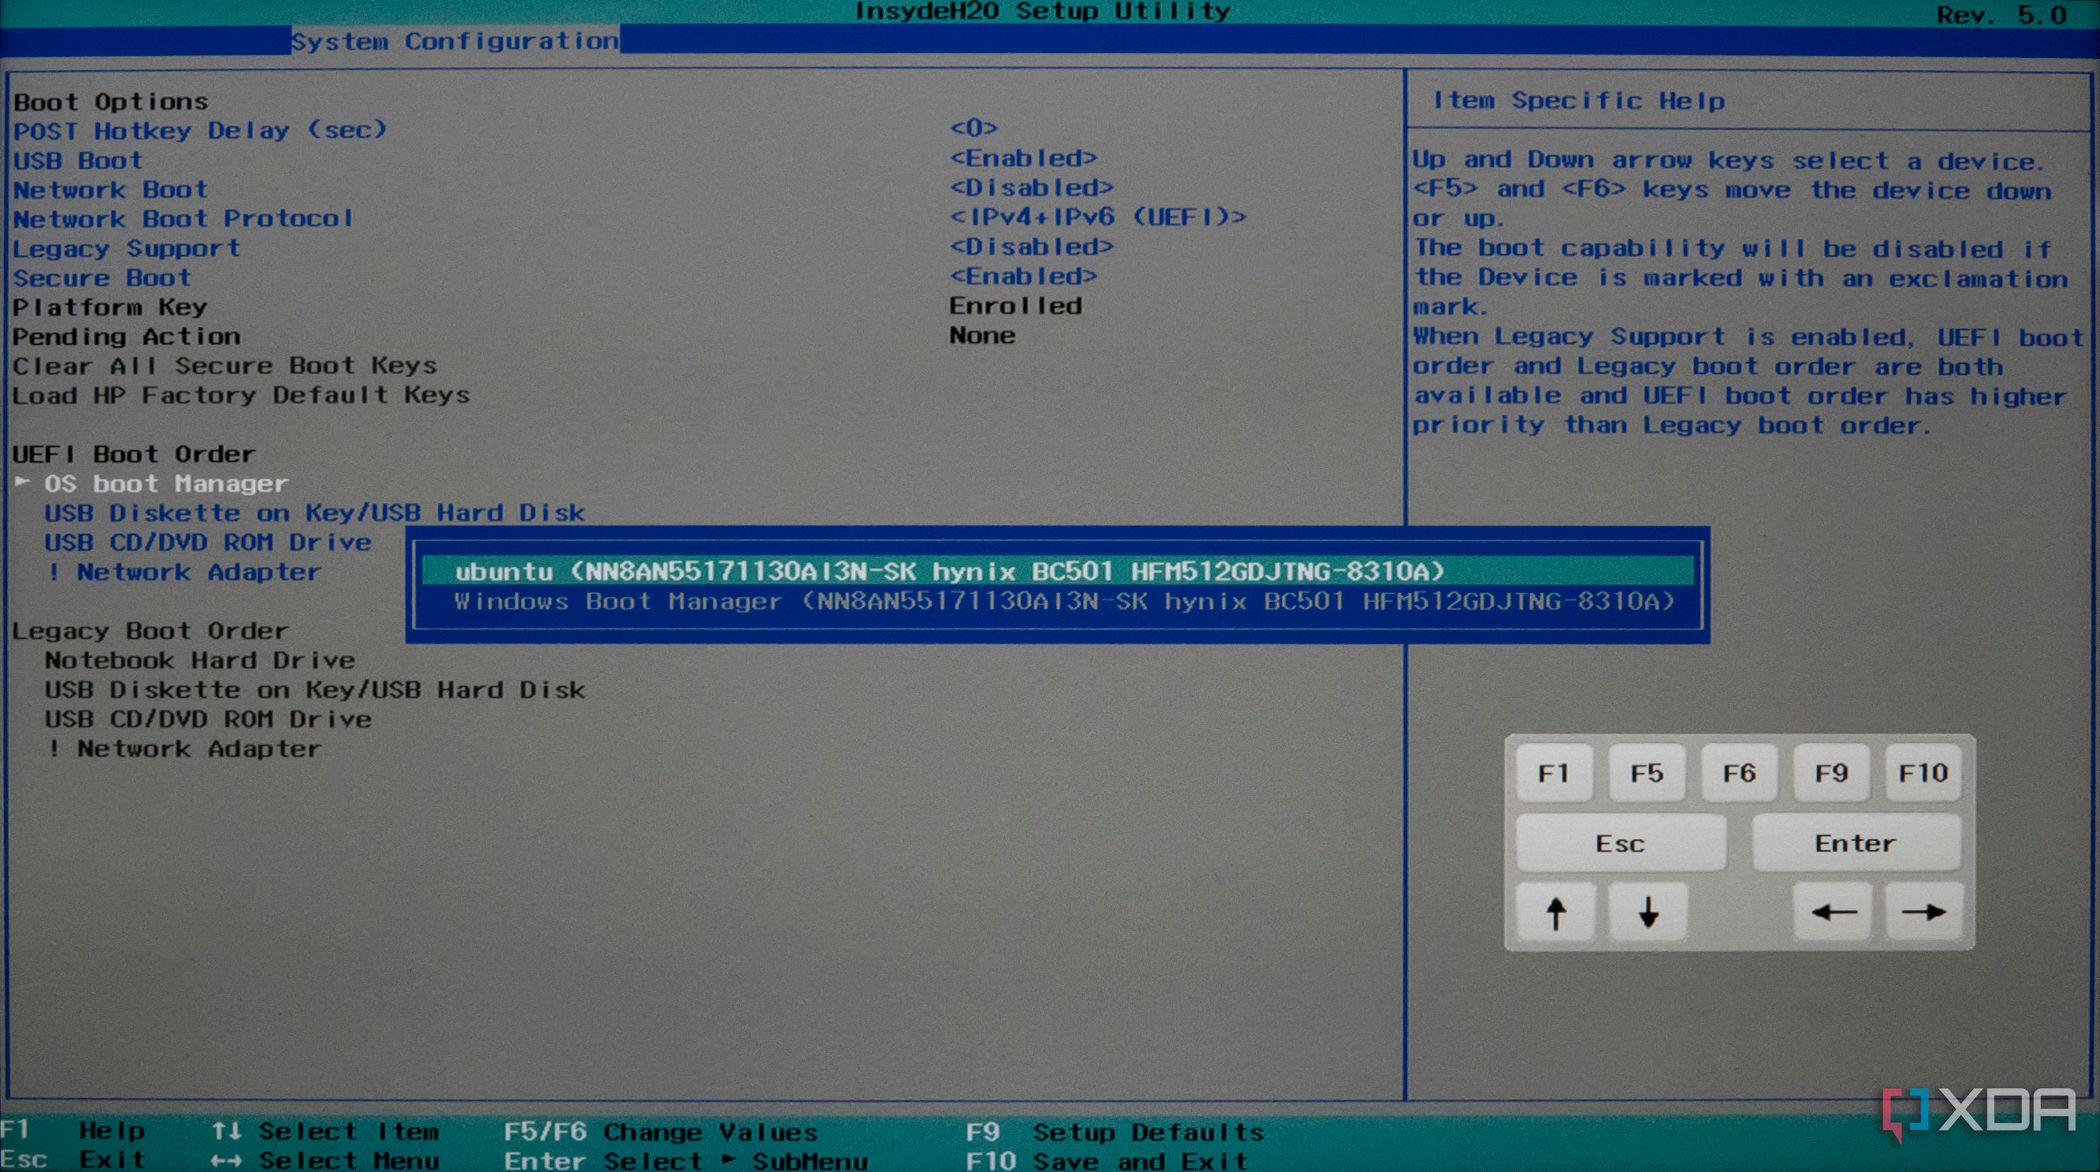 Screenshot of BIOS settings showing Ubuntu as the first option in the OS Boot Manager